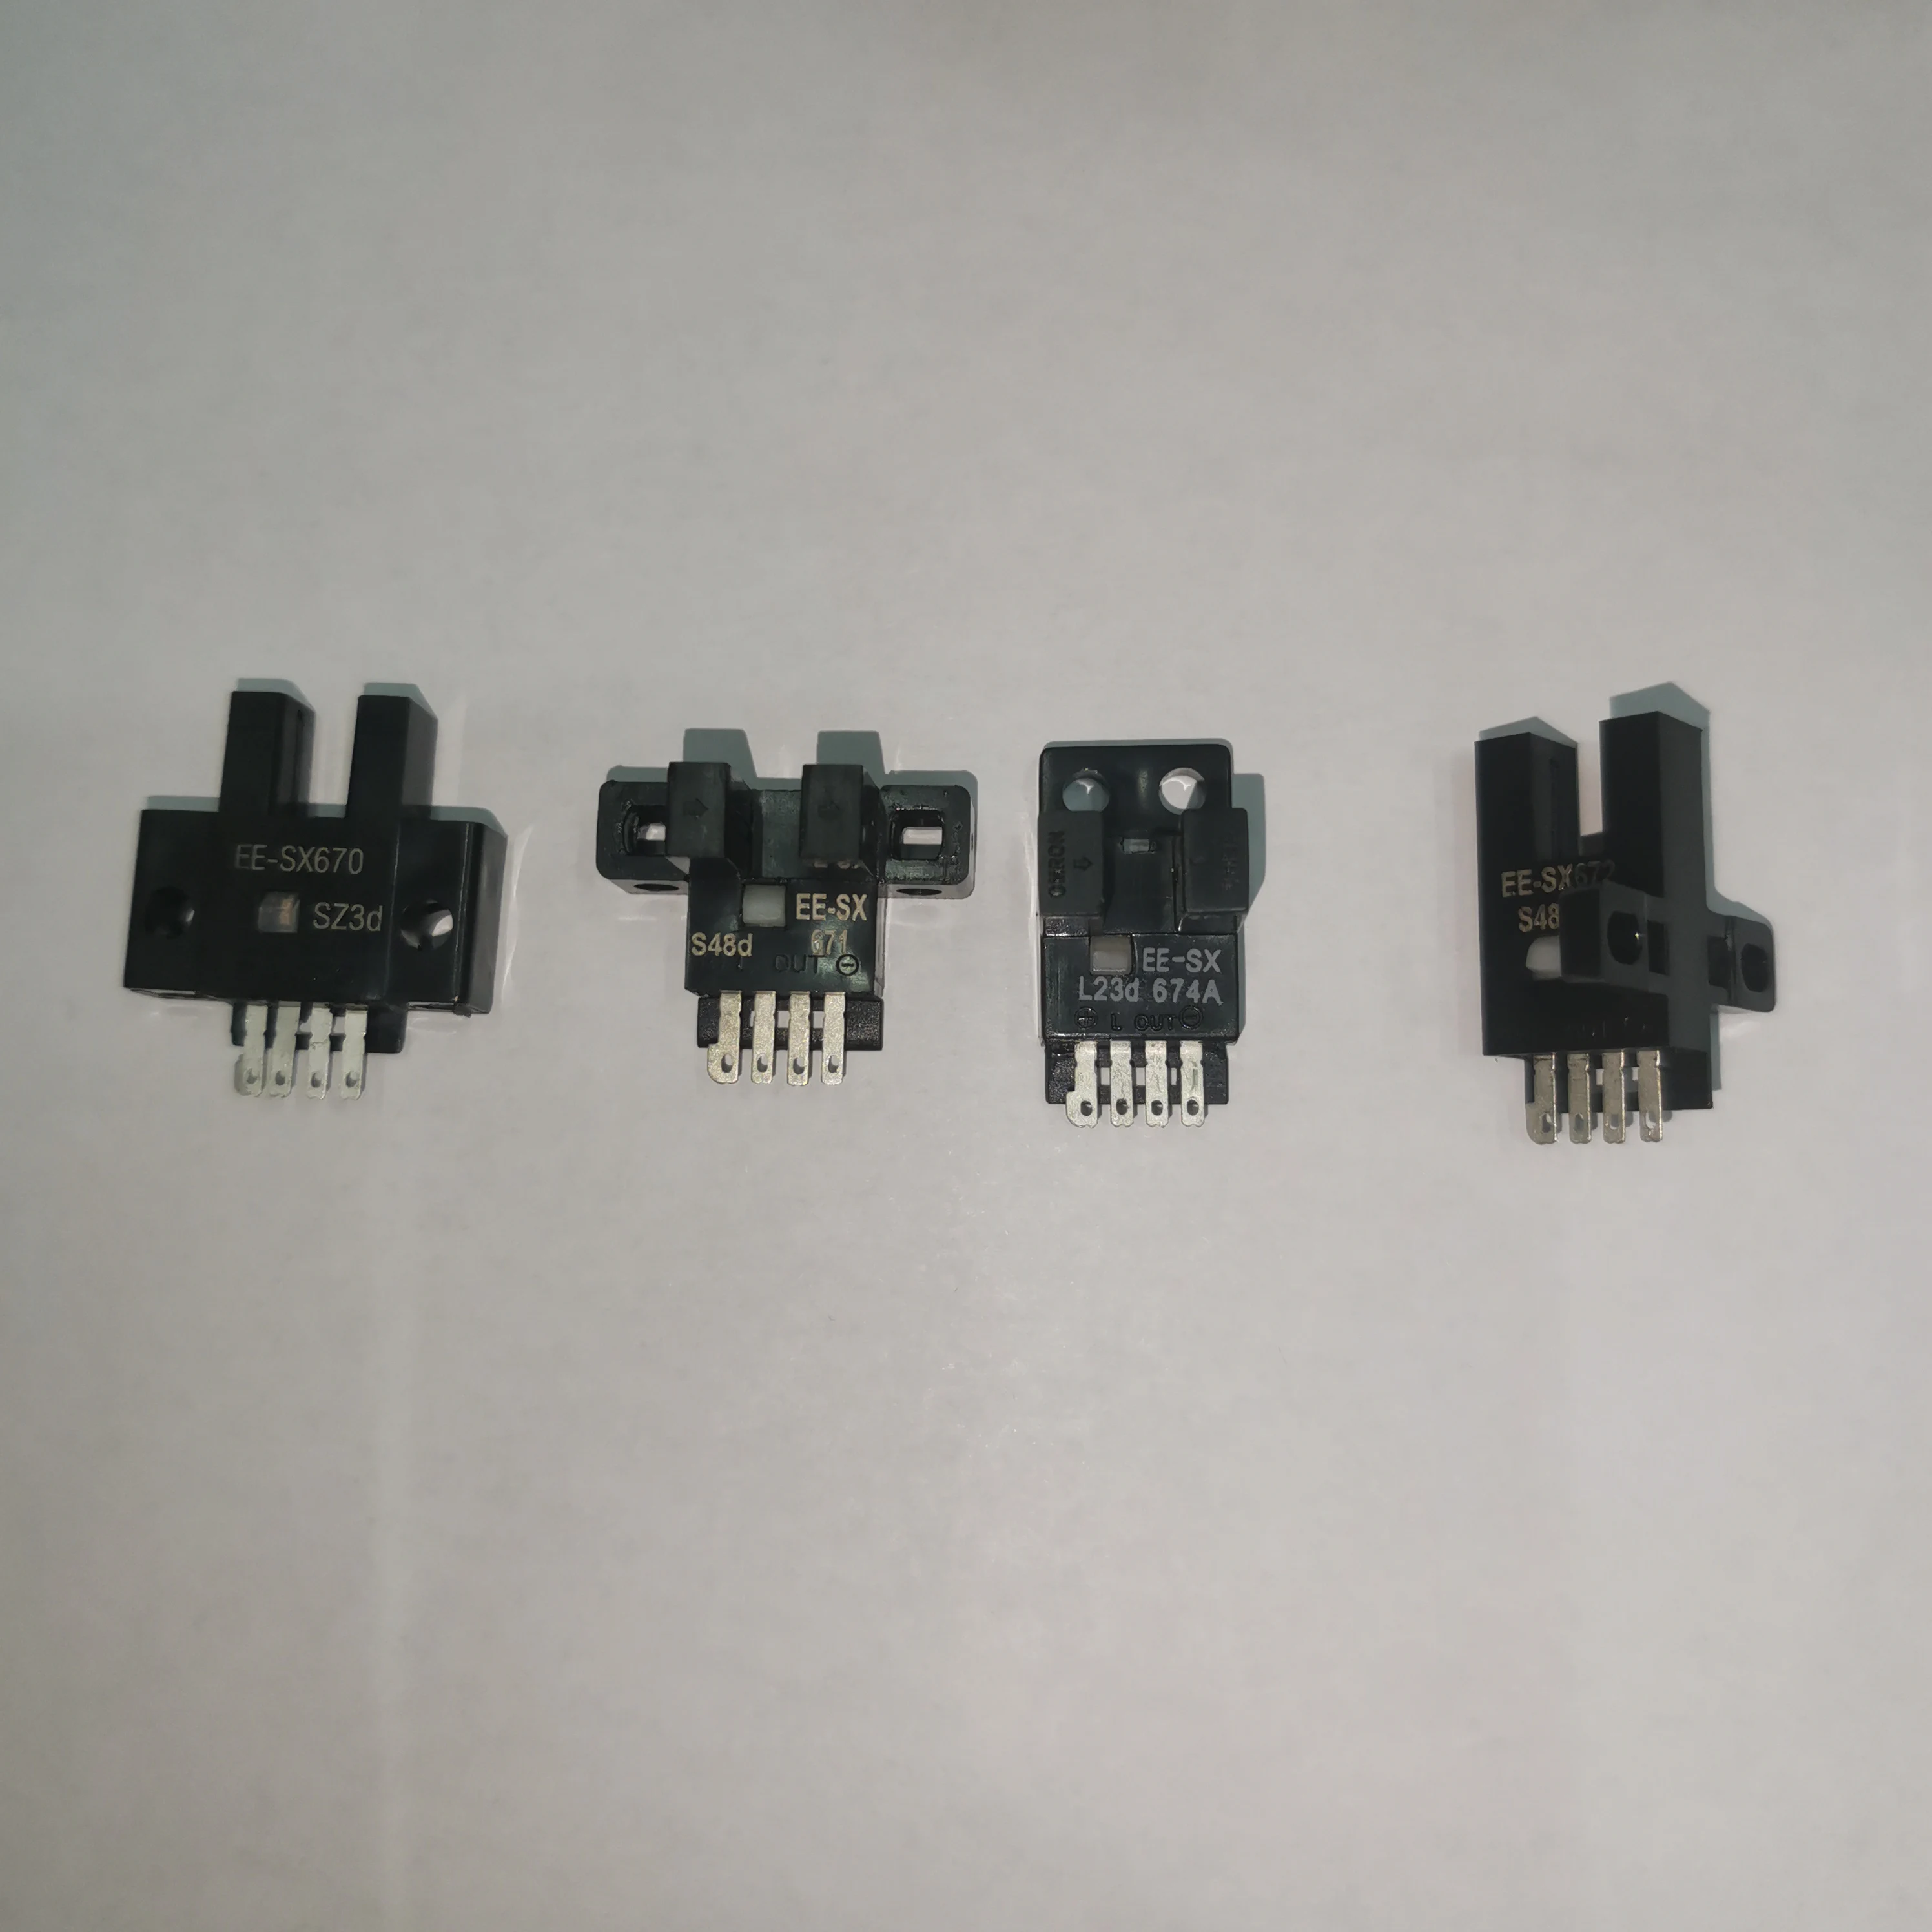 

10Pcs EE-SX670 EE-SX671 EE-SX672 EE-SX673 EE-SX674 EE-SX670A - SX674A EE-SX671R EE-SX674P New Photoelectric Switch Sensors